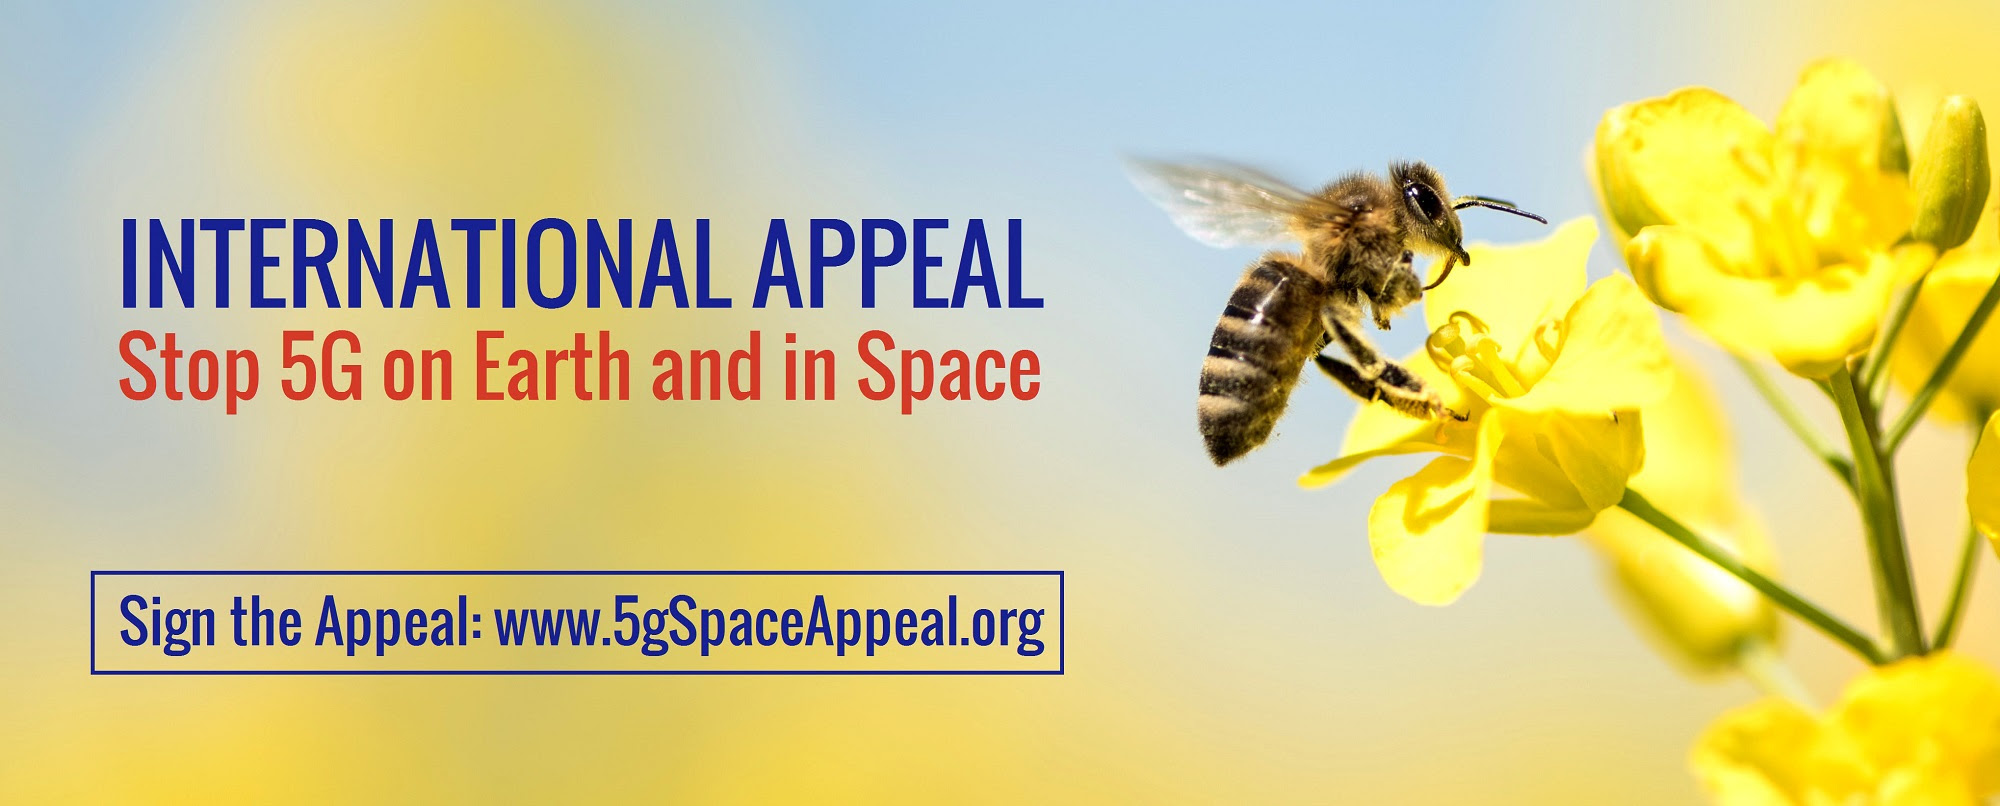 International Appeal to Stop 5G On Earth and in Space 78aa9c1fdbd125d7d64cbf32fc8a9e18315f13d6461d573e4fdbf8d302d03397